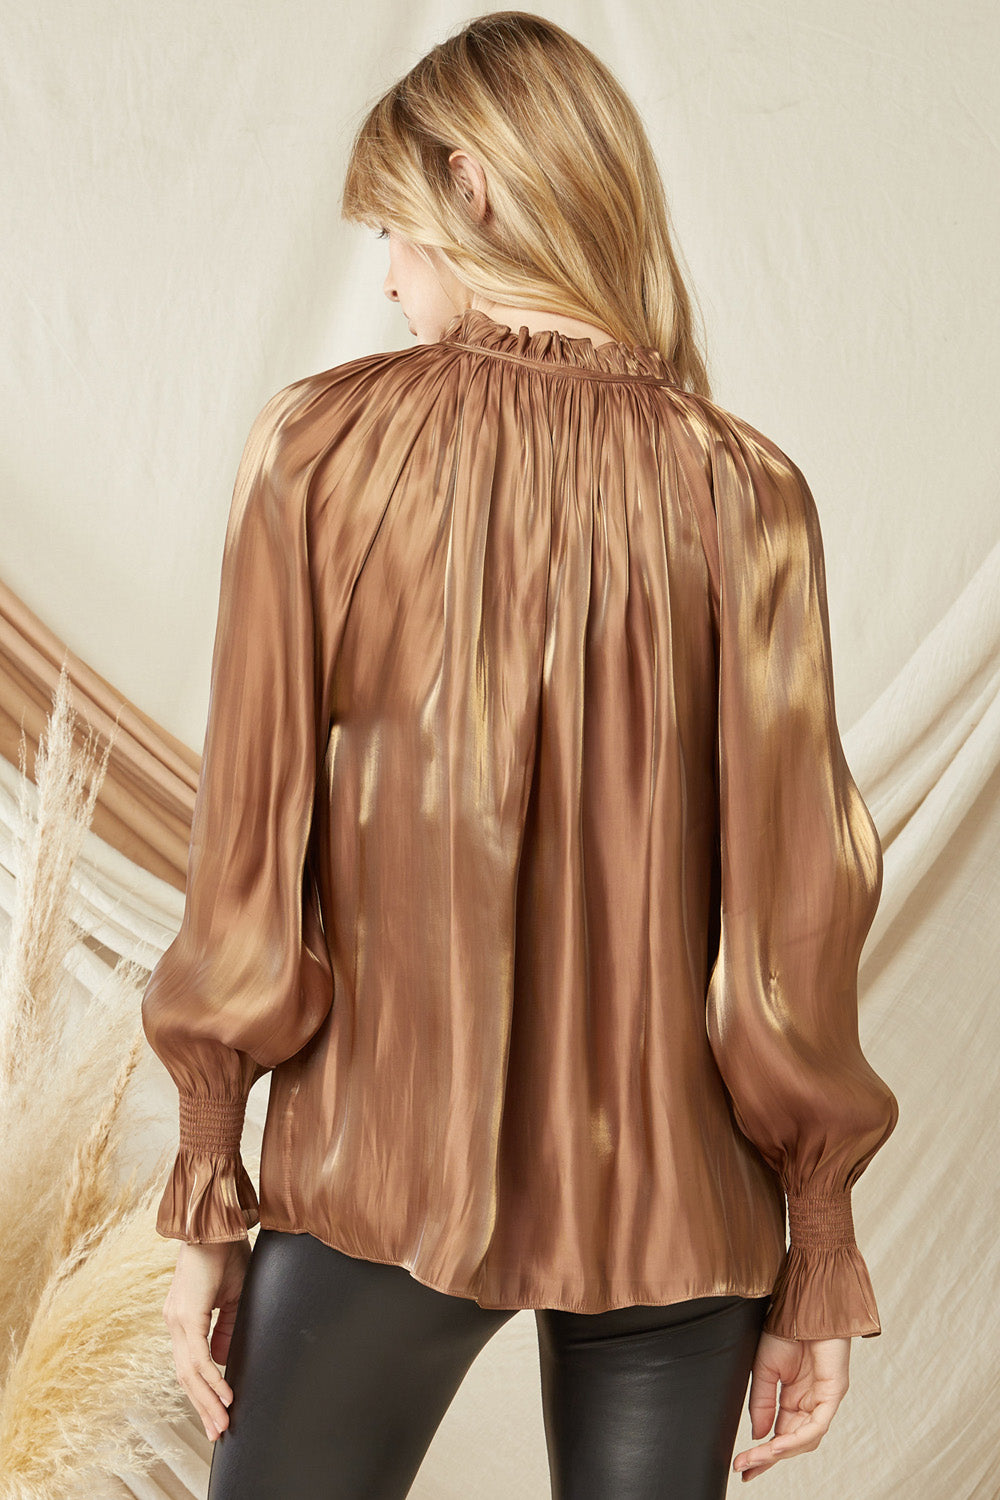 Ready For The Party Top in Mocha